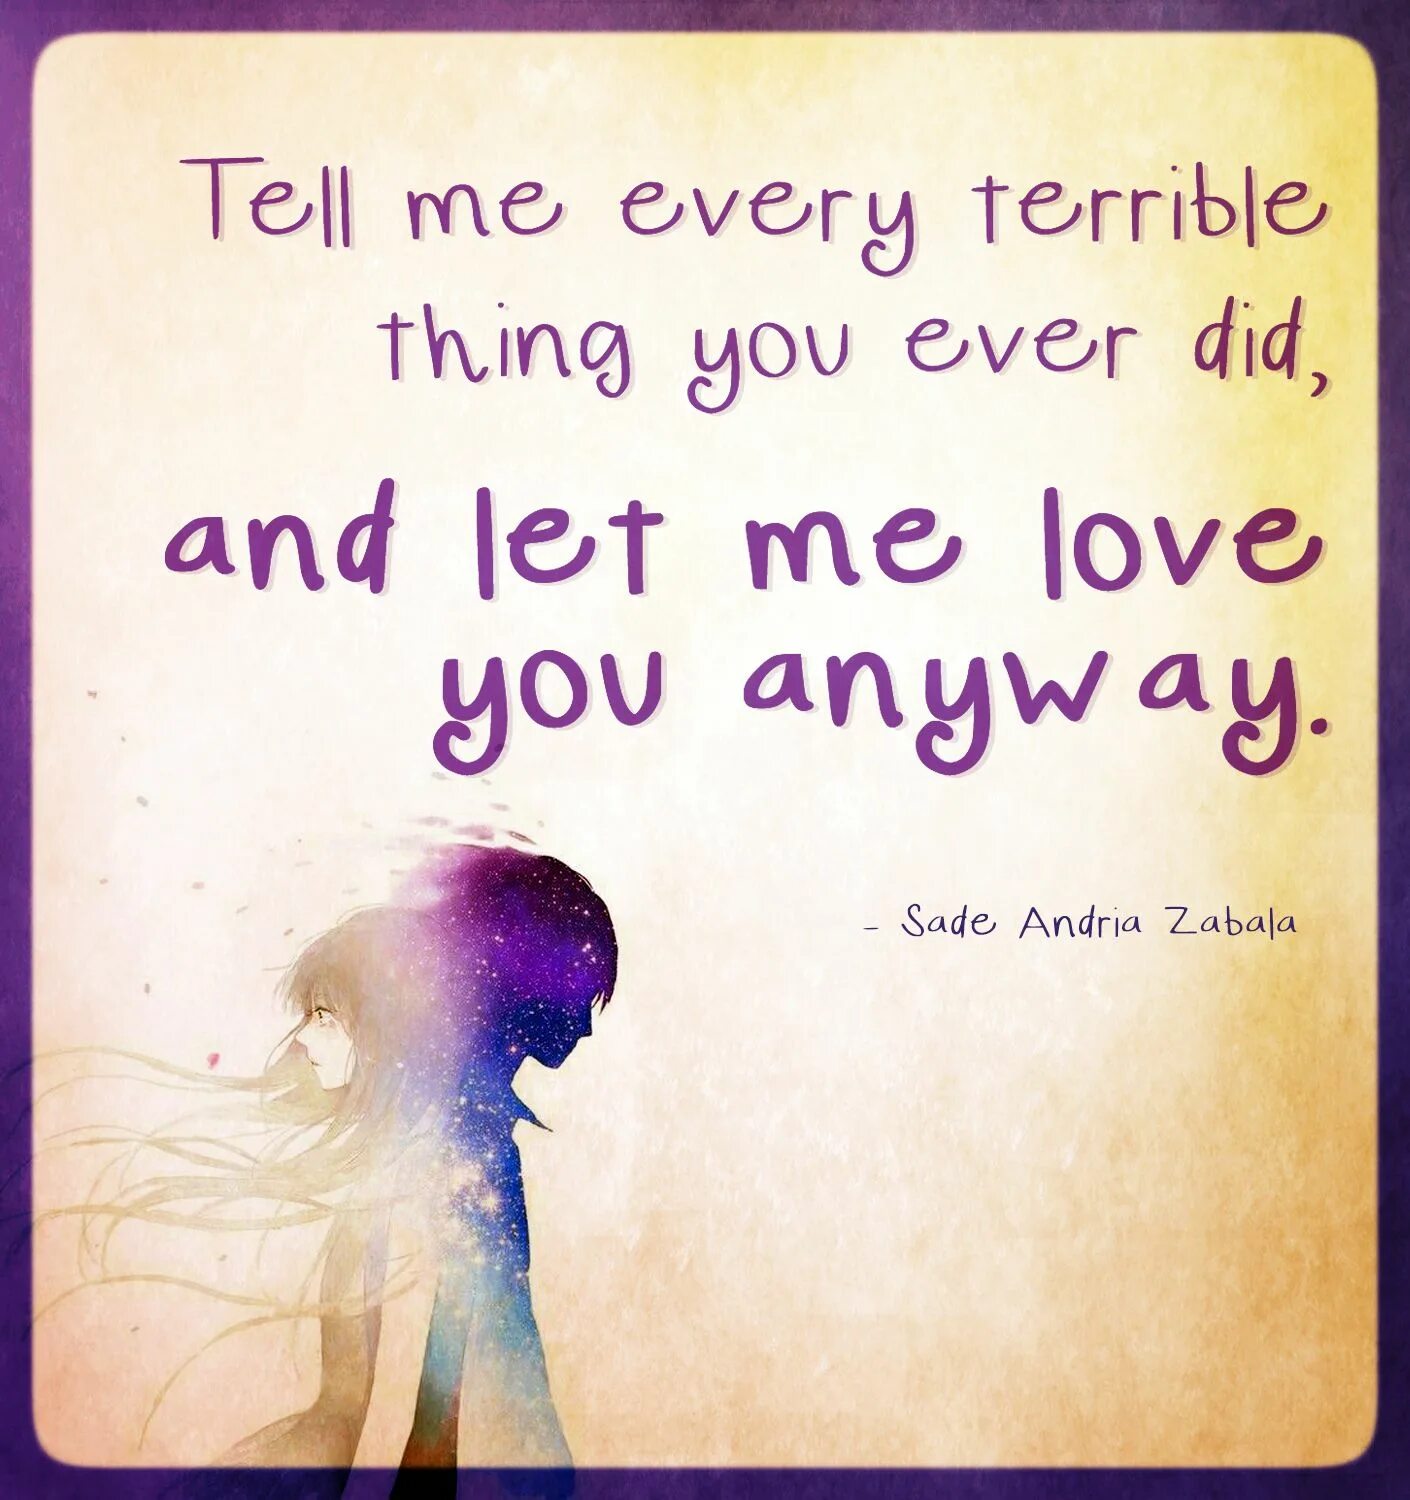 Terrible things. Фф terrible thing. Every me and every you. I told you. Do you ever talk